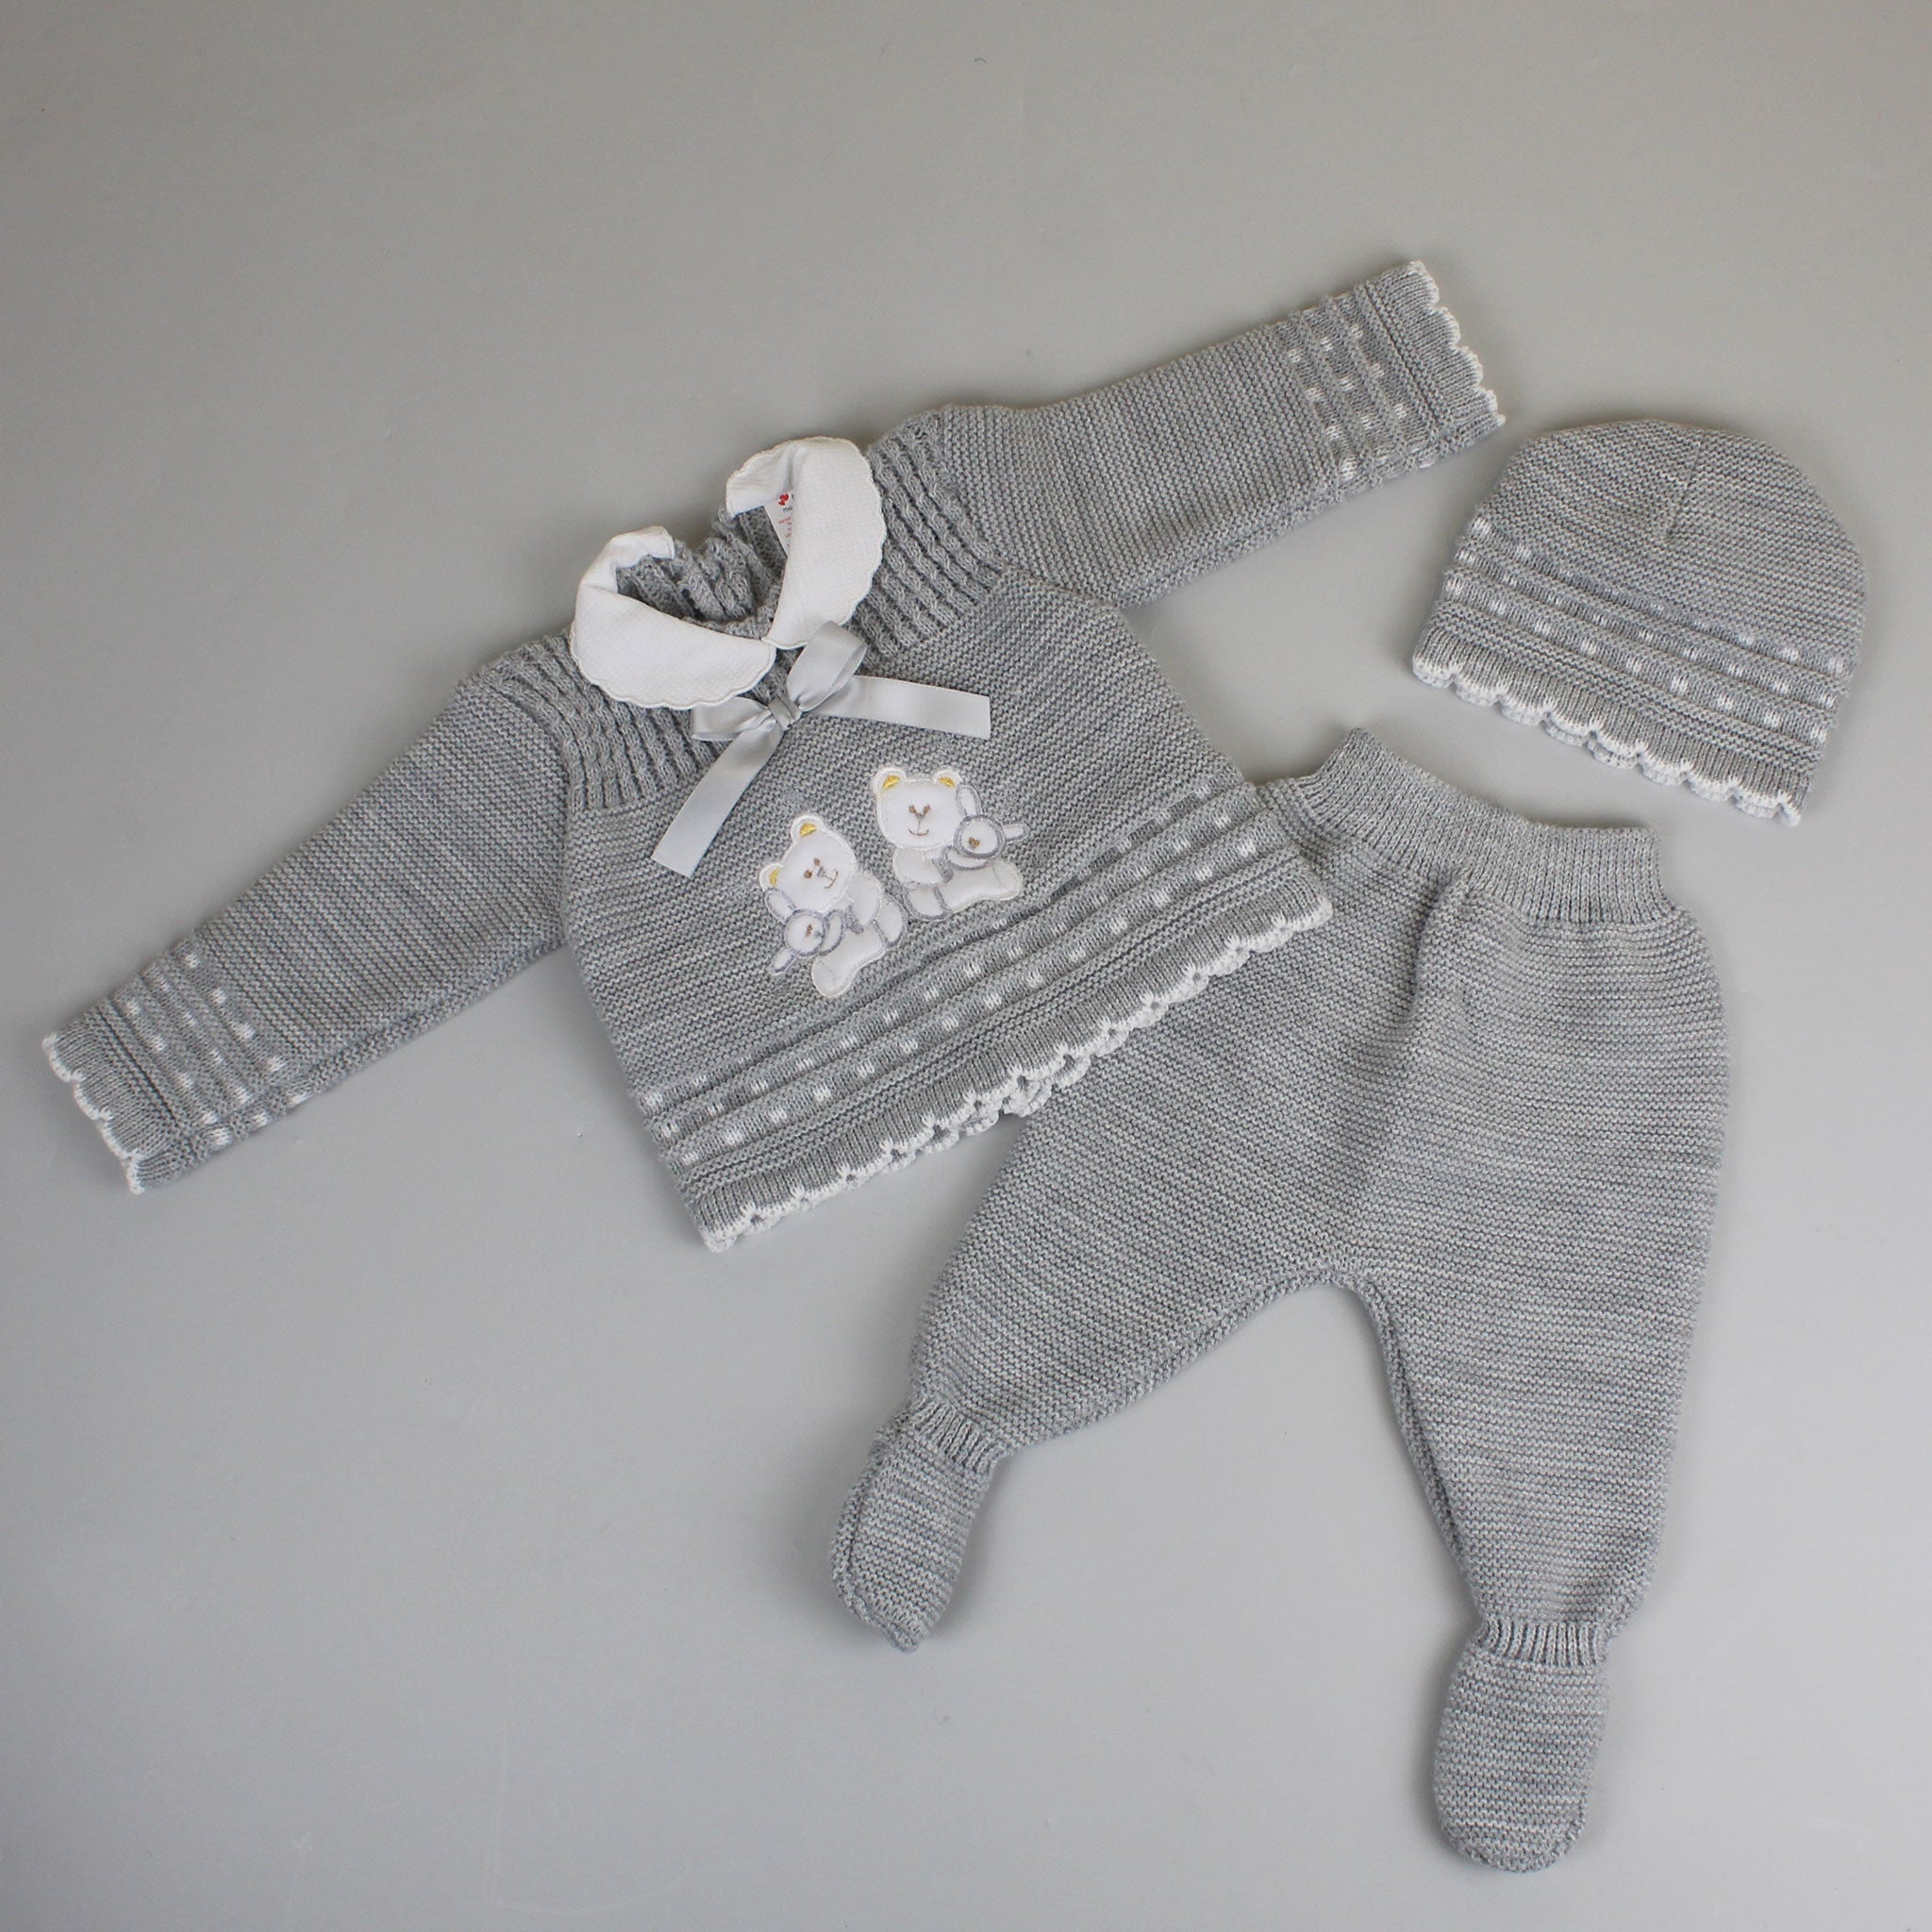 unisex grey three piece outfit